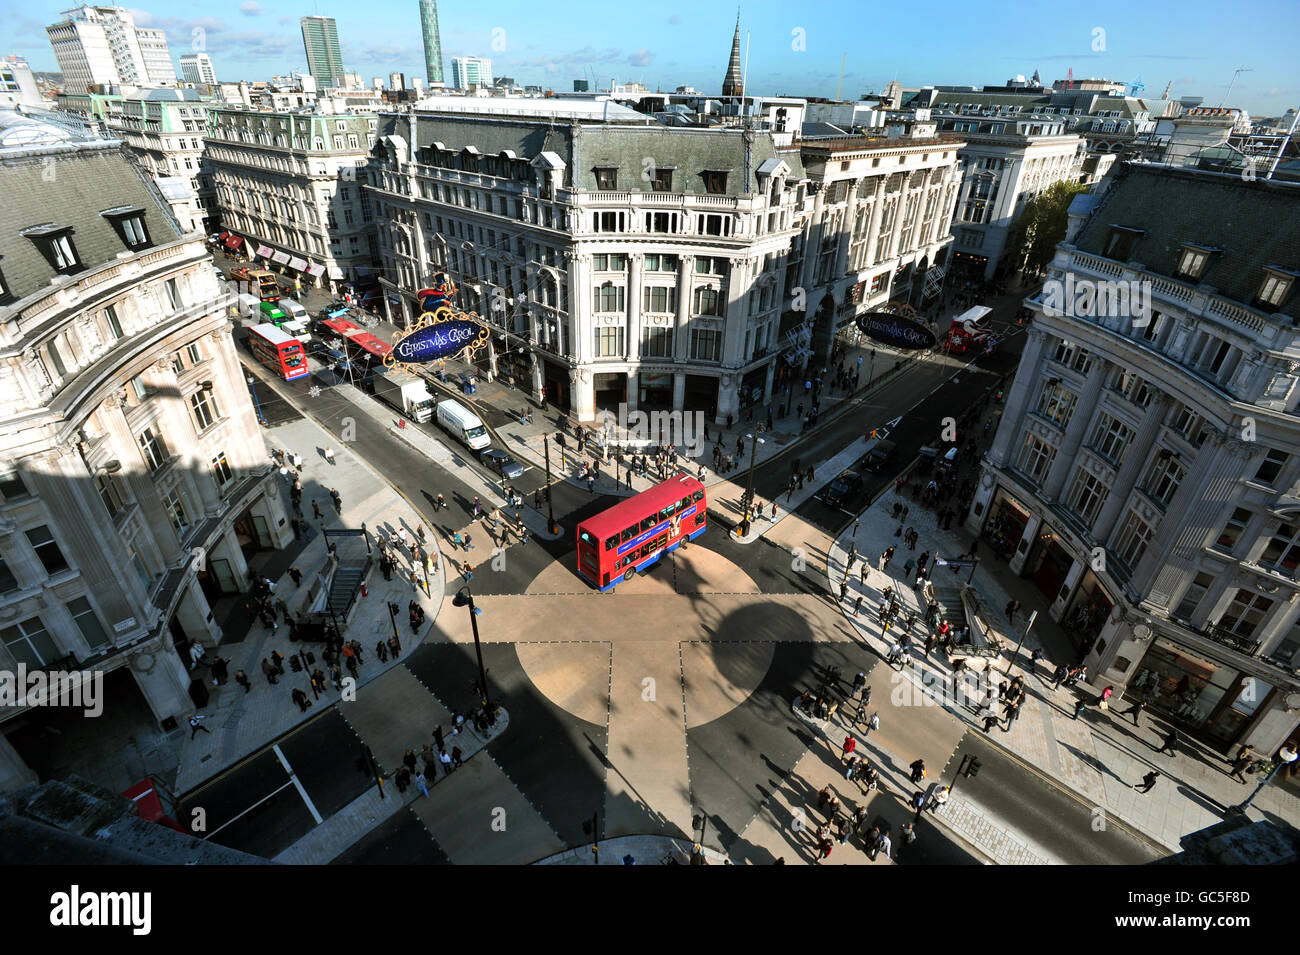 A general view of the new diagonal pedestrian crossing at Oxford Circus in London's West End, seen from the top of an adjacent building. Stock Photo